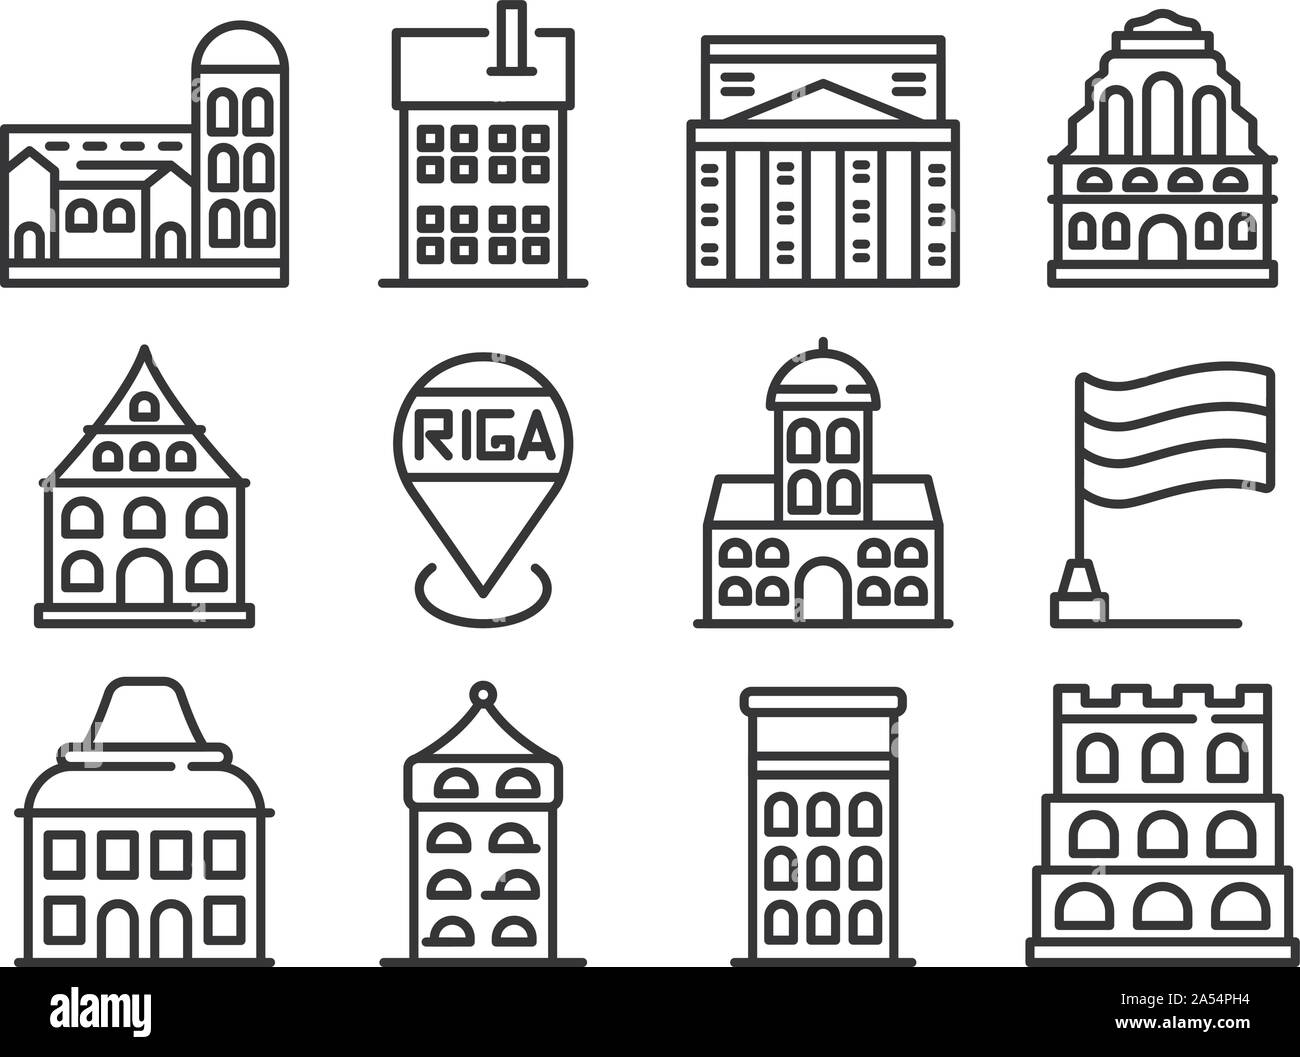 Riga icons set, outline style Stock Vector